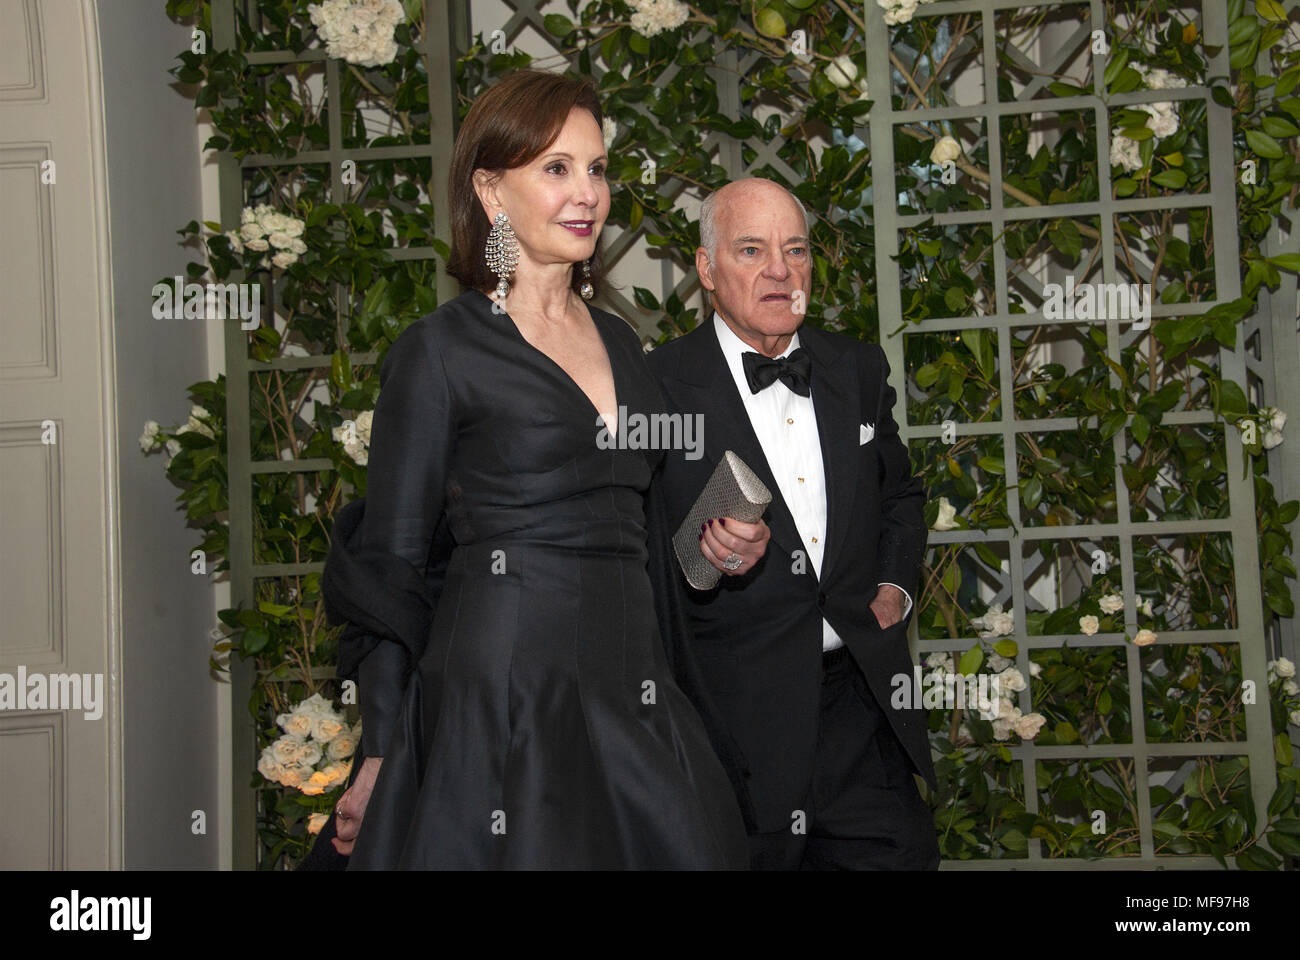 Washington, District of Columbia, USA. 24th Apr, 2018. Henry Kravis and Mrs. Marie-Josée Kravis arrive for the State Dinner honoring Dinner honoring President Emmanuel Macron of the French Republic and Mrs. Brigitte Macron at the White House in Washington, DC on Tuesday, April 24, 2018.Credit: Ron Sachs/CNP Credit: Ron Sachs/CNP/ZUMA Wire/Alamy Live News Stock Photo